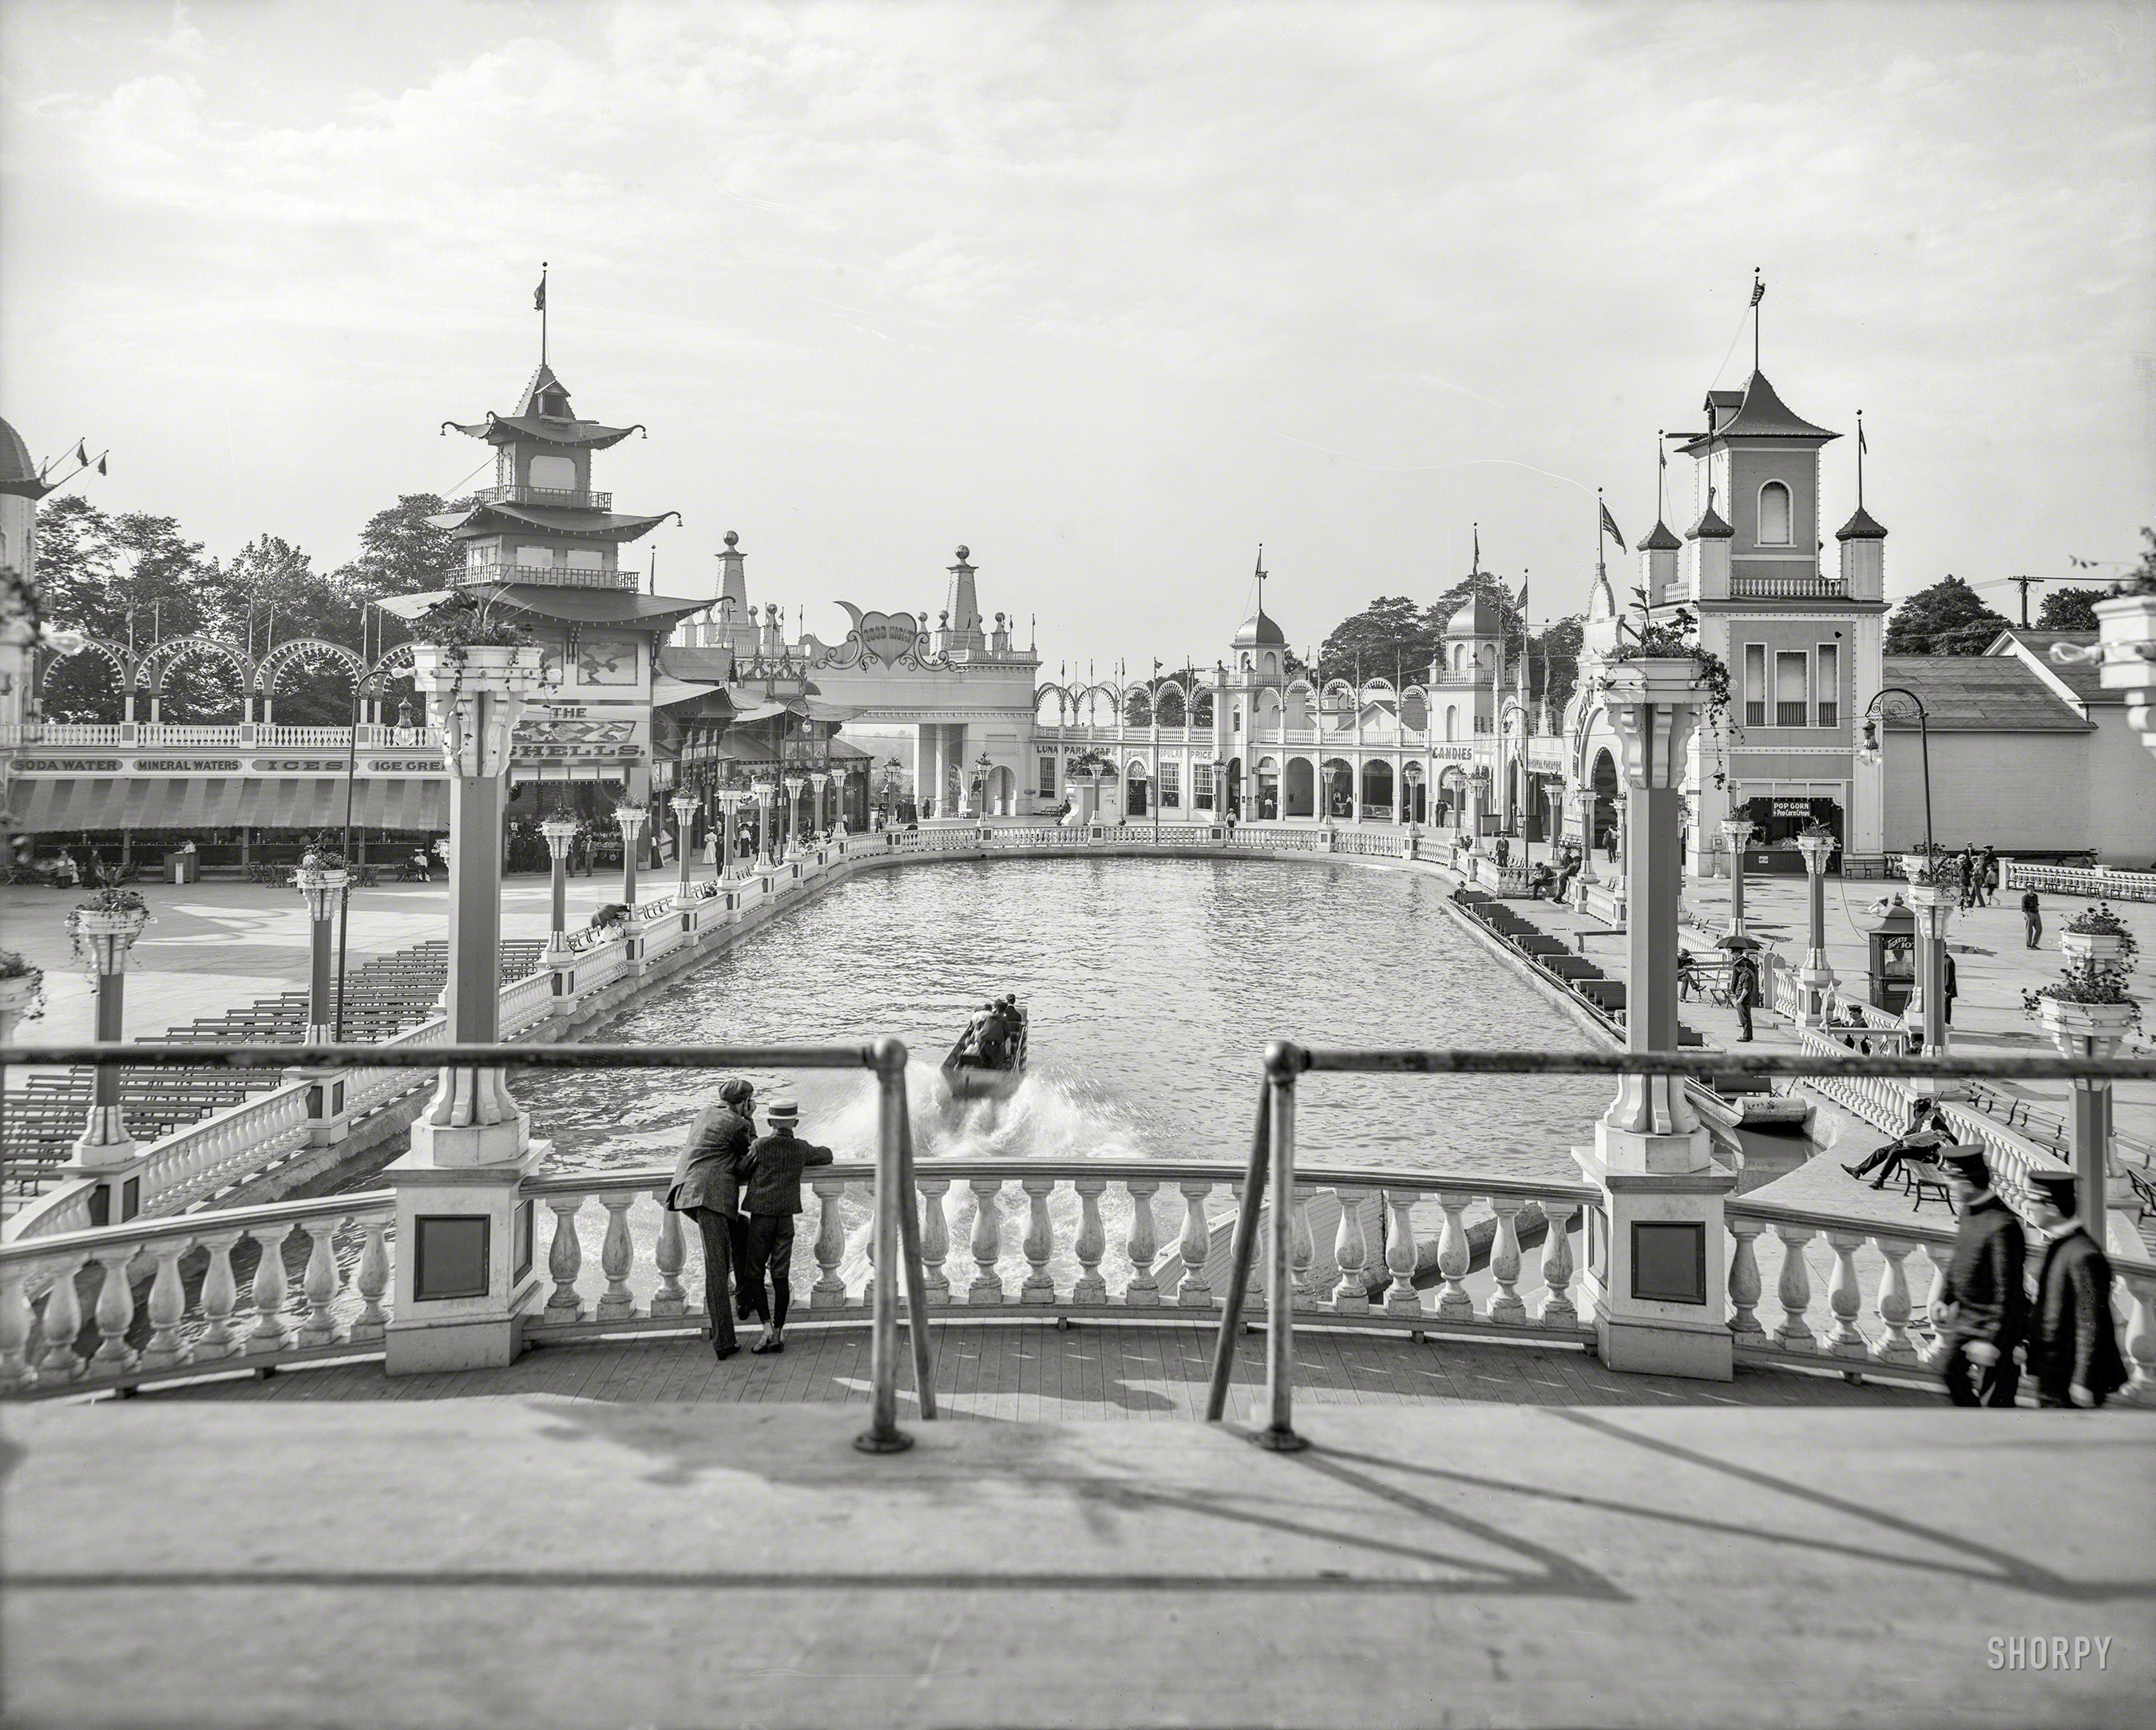 Cleveland, Ohio, circa 1905. "Shoot-the-Chutes ride at Luna Park." 8x10 inch dry plate glass negative, Detroit Publishing Company. View full size.